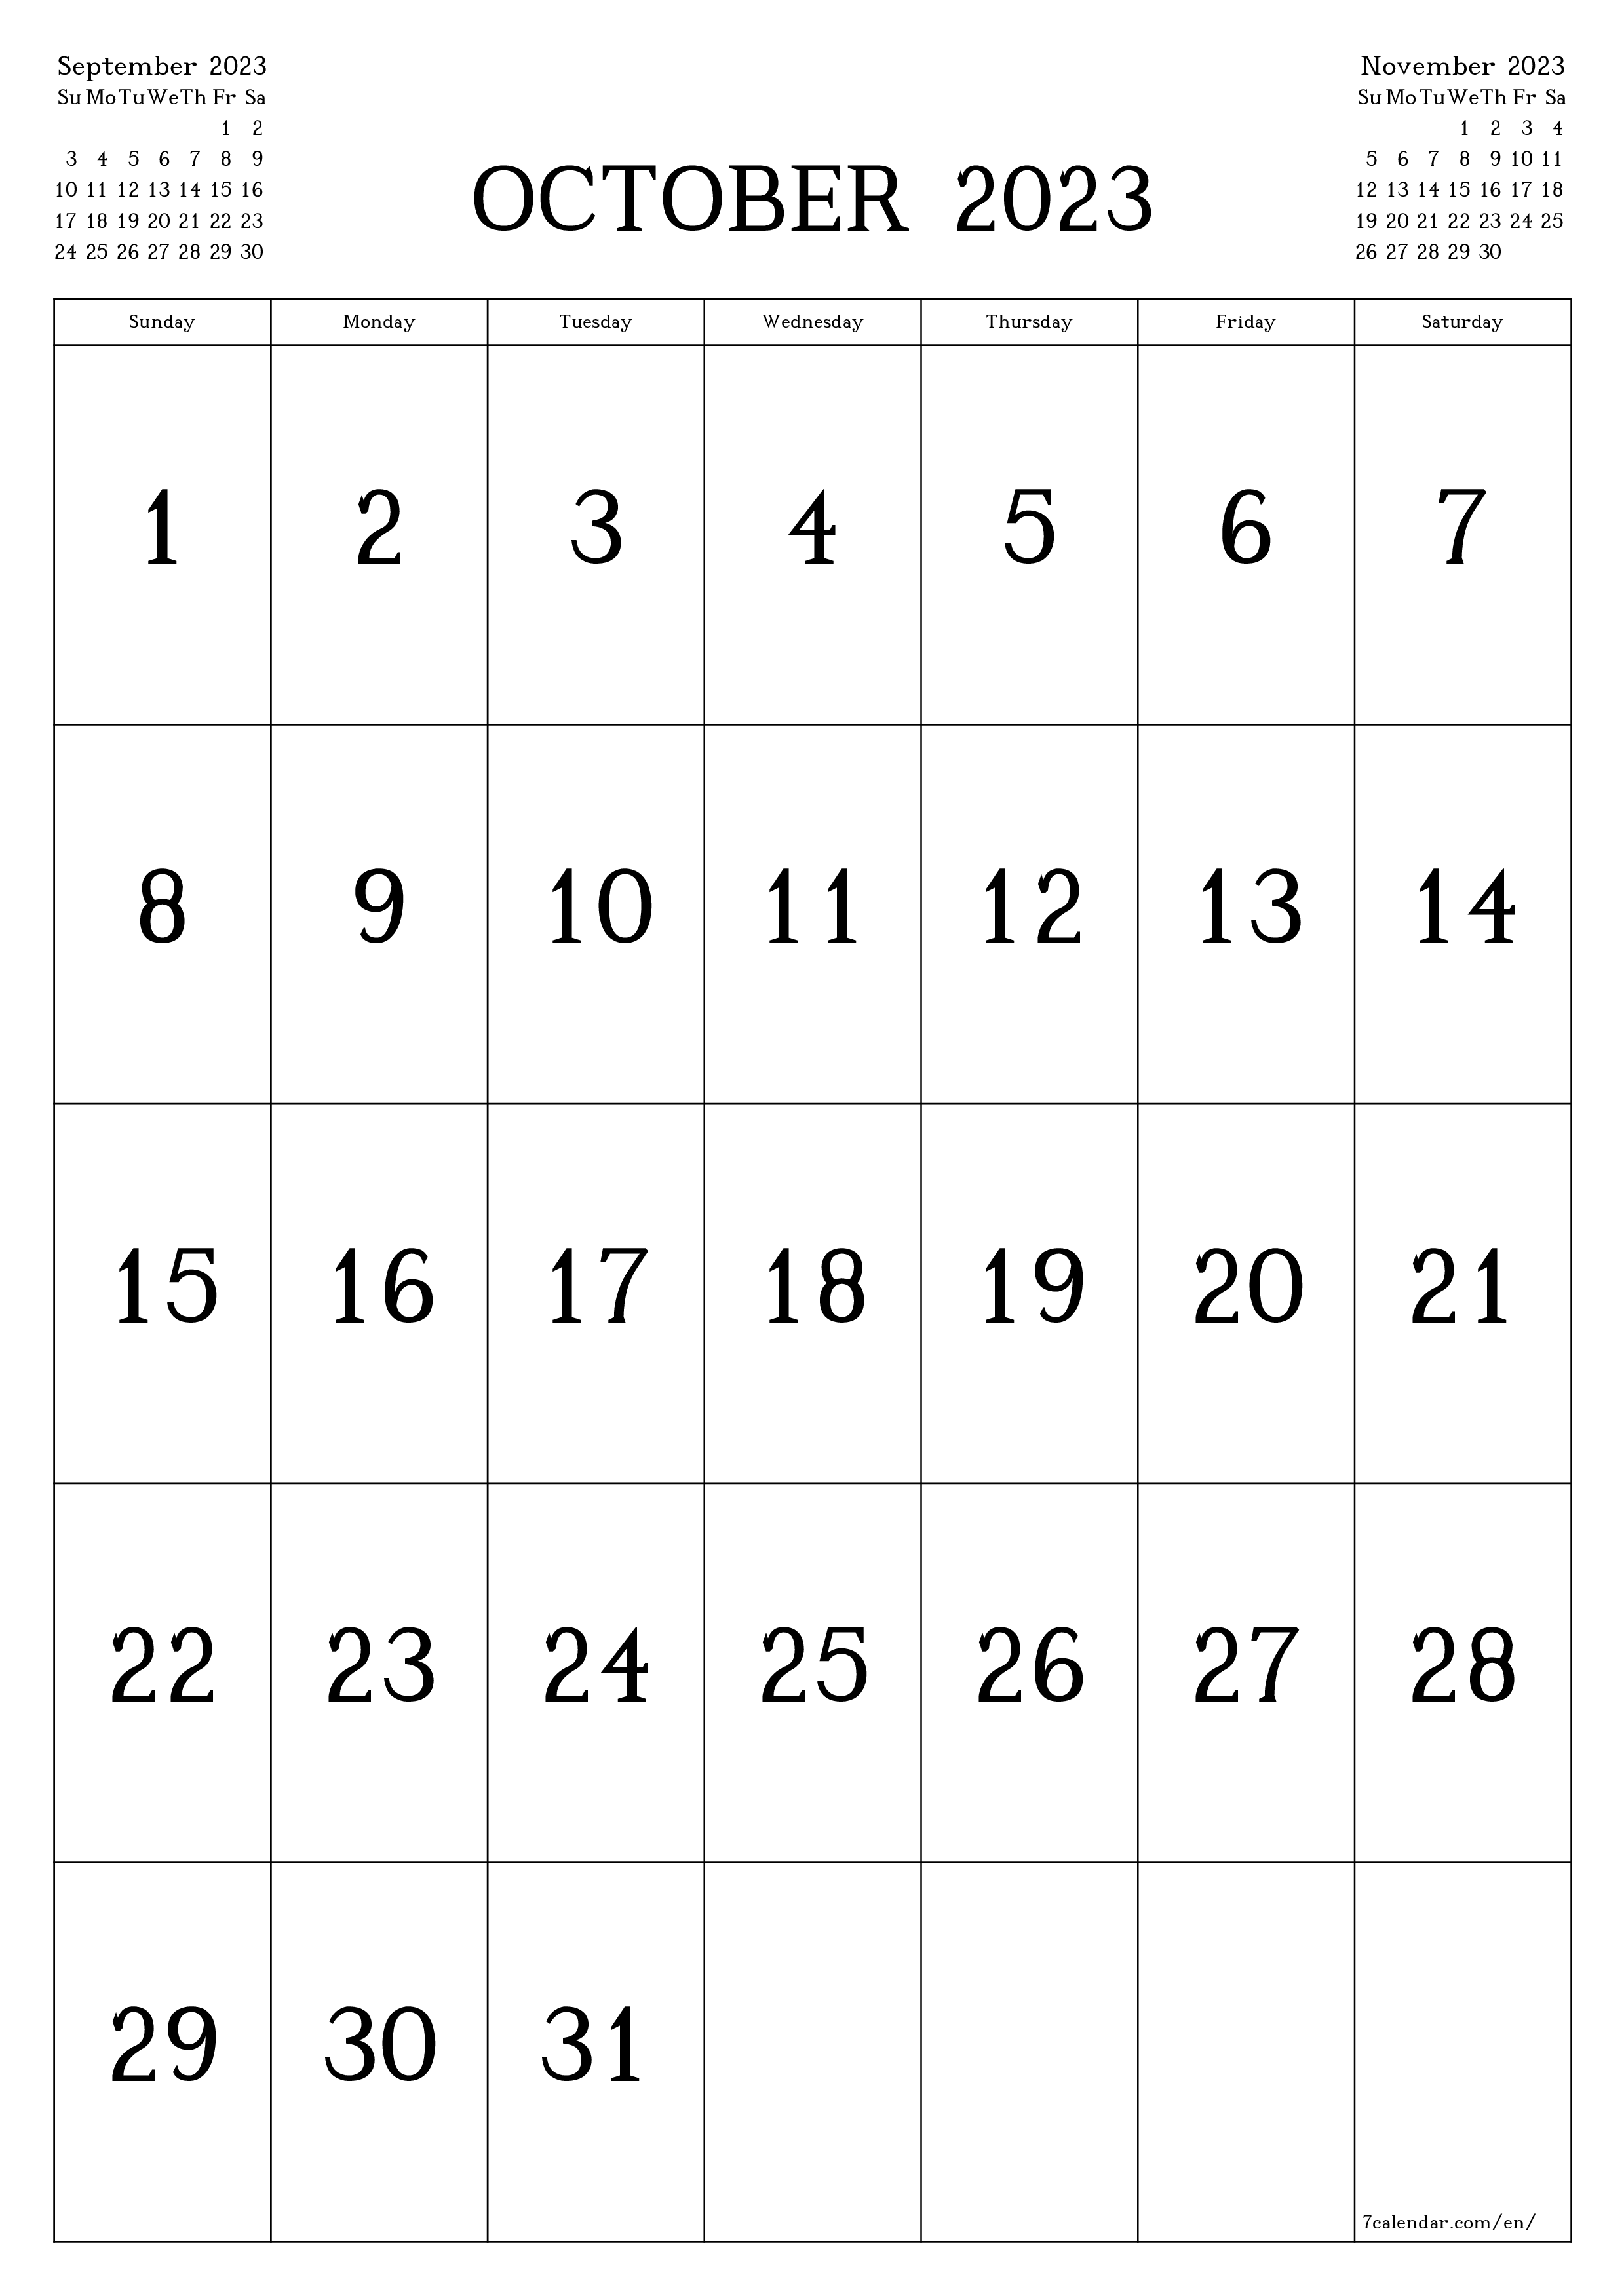 Blank monthly printable calendar and planner for month October 2023 with notes save and print to PDF PNG English - 7calendar.com